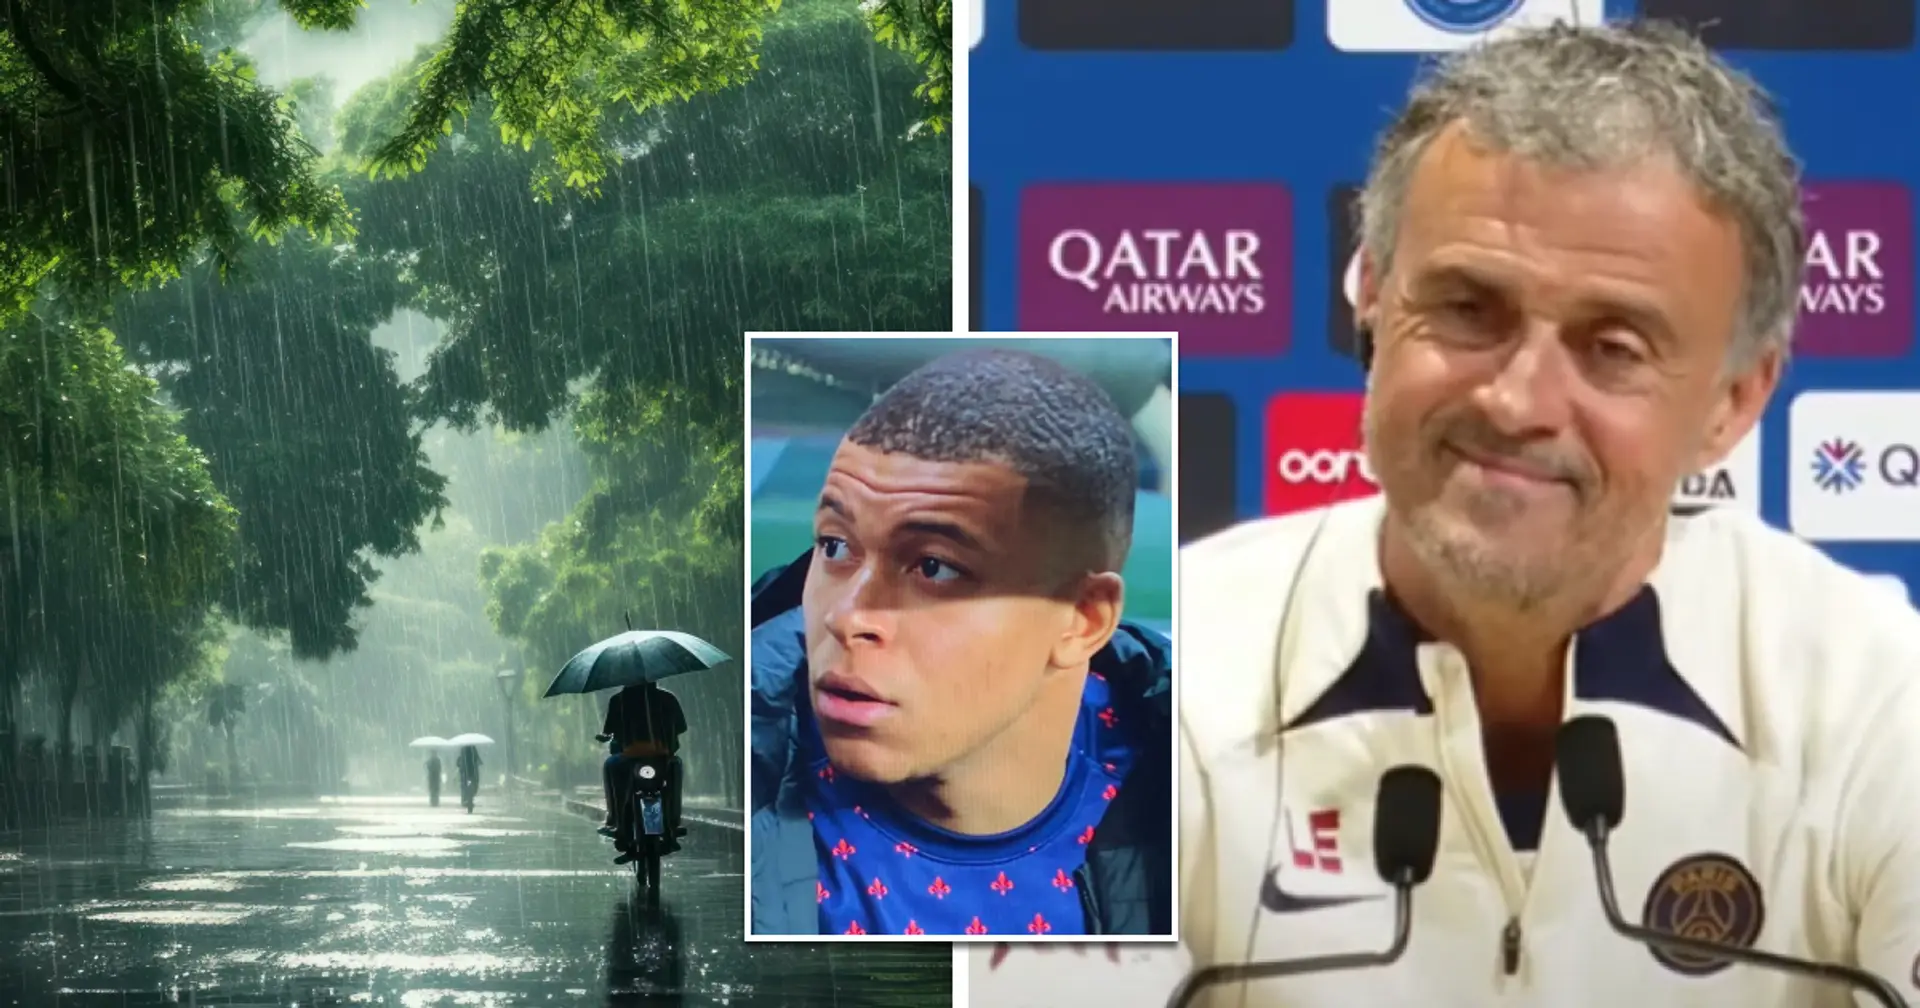 'Today it's raining, but it's also a very beautiful day': Luis Enrique answers question about Mbappe's future